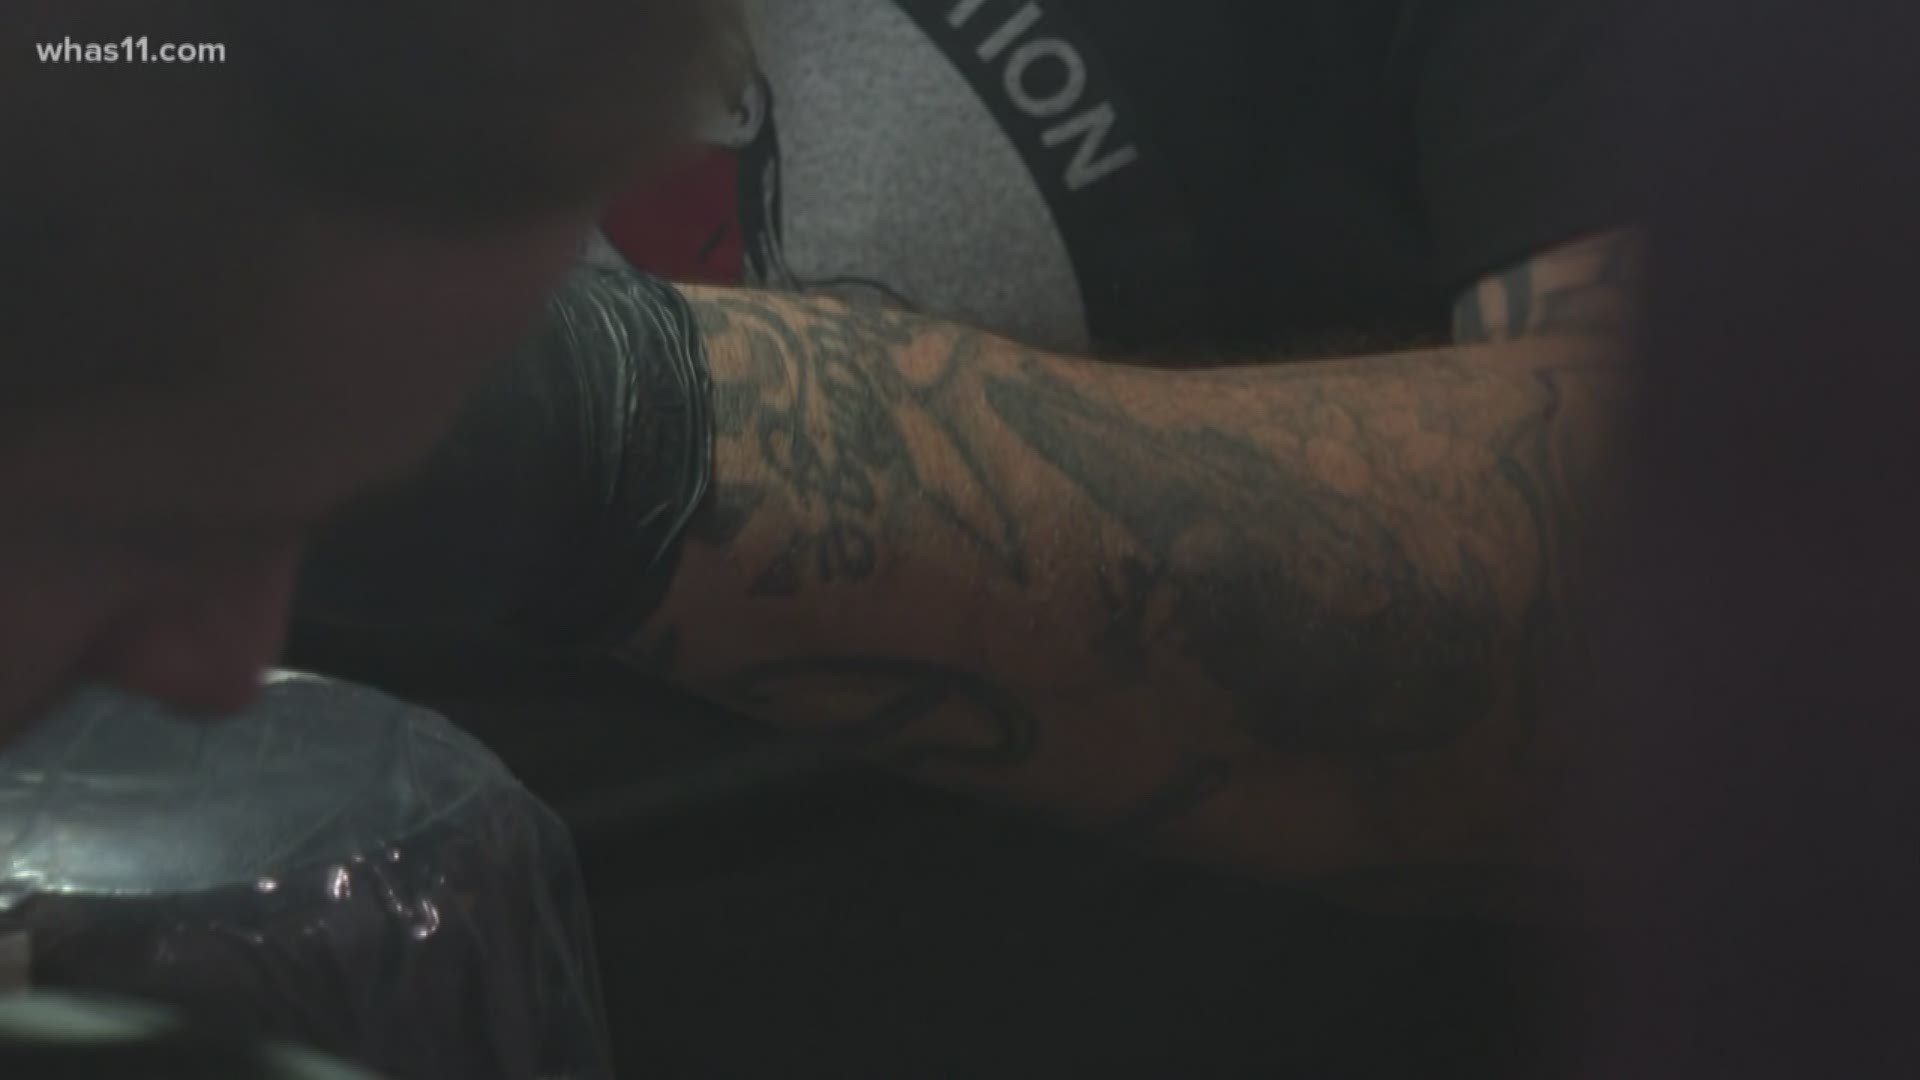 After a proposed ban on tattoos over scarred skin caused an uproar, Kentucky health officials offered community members a seat at the table to listen to what they have to say.